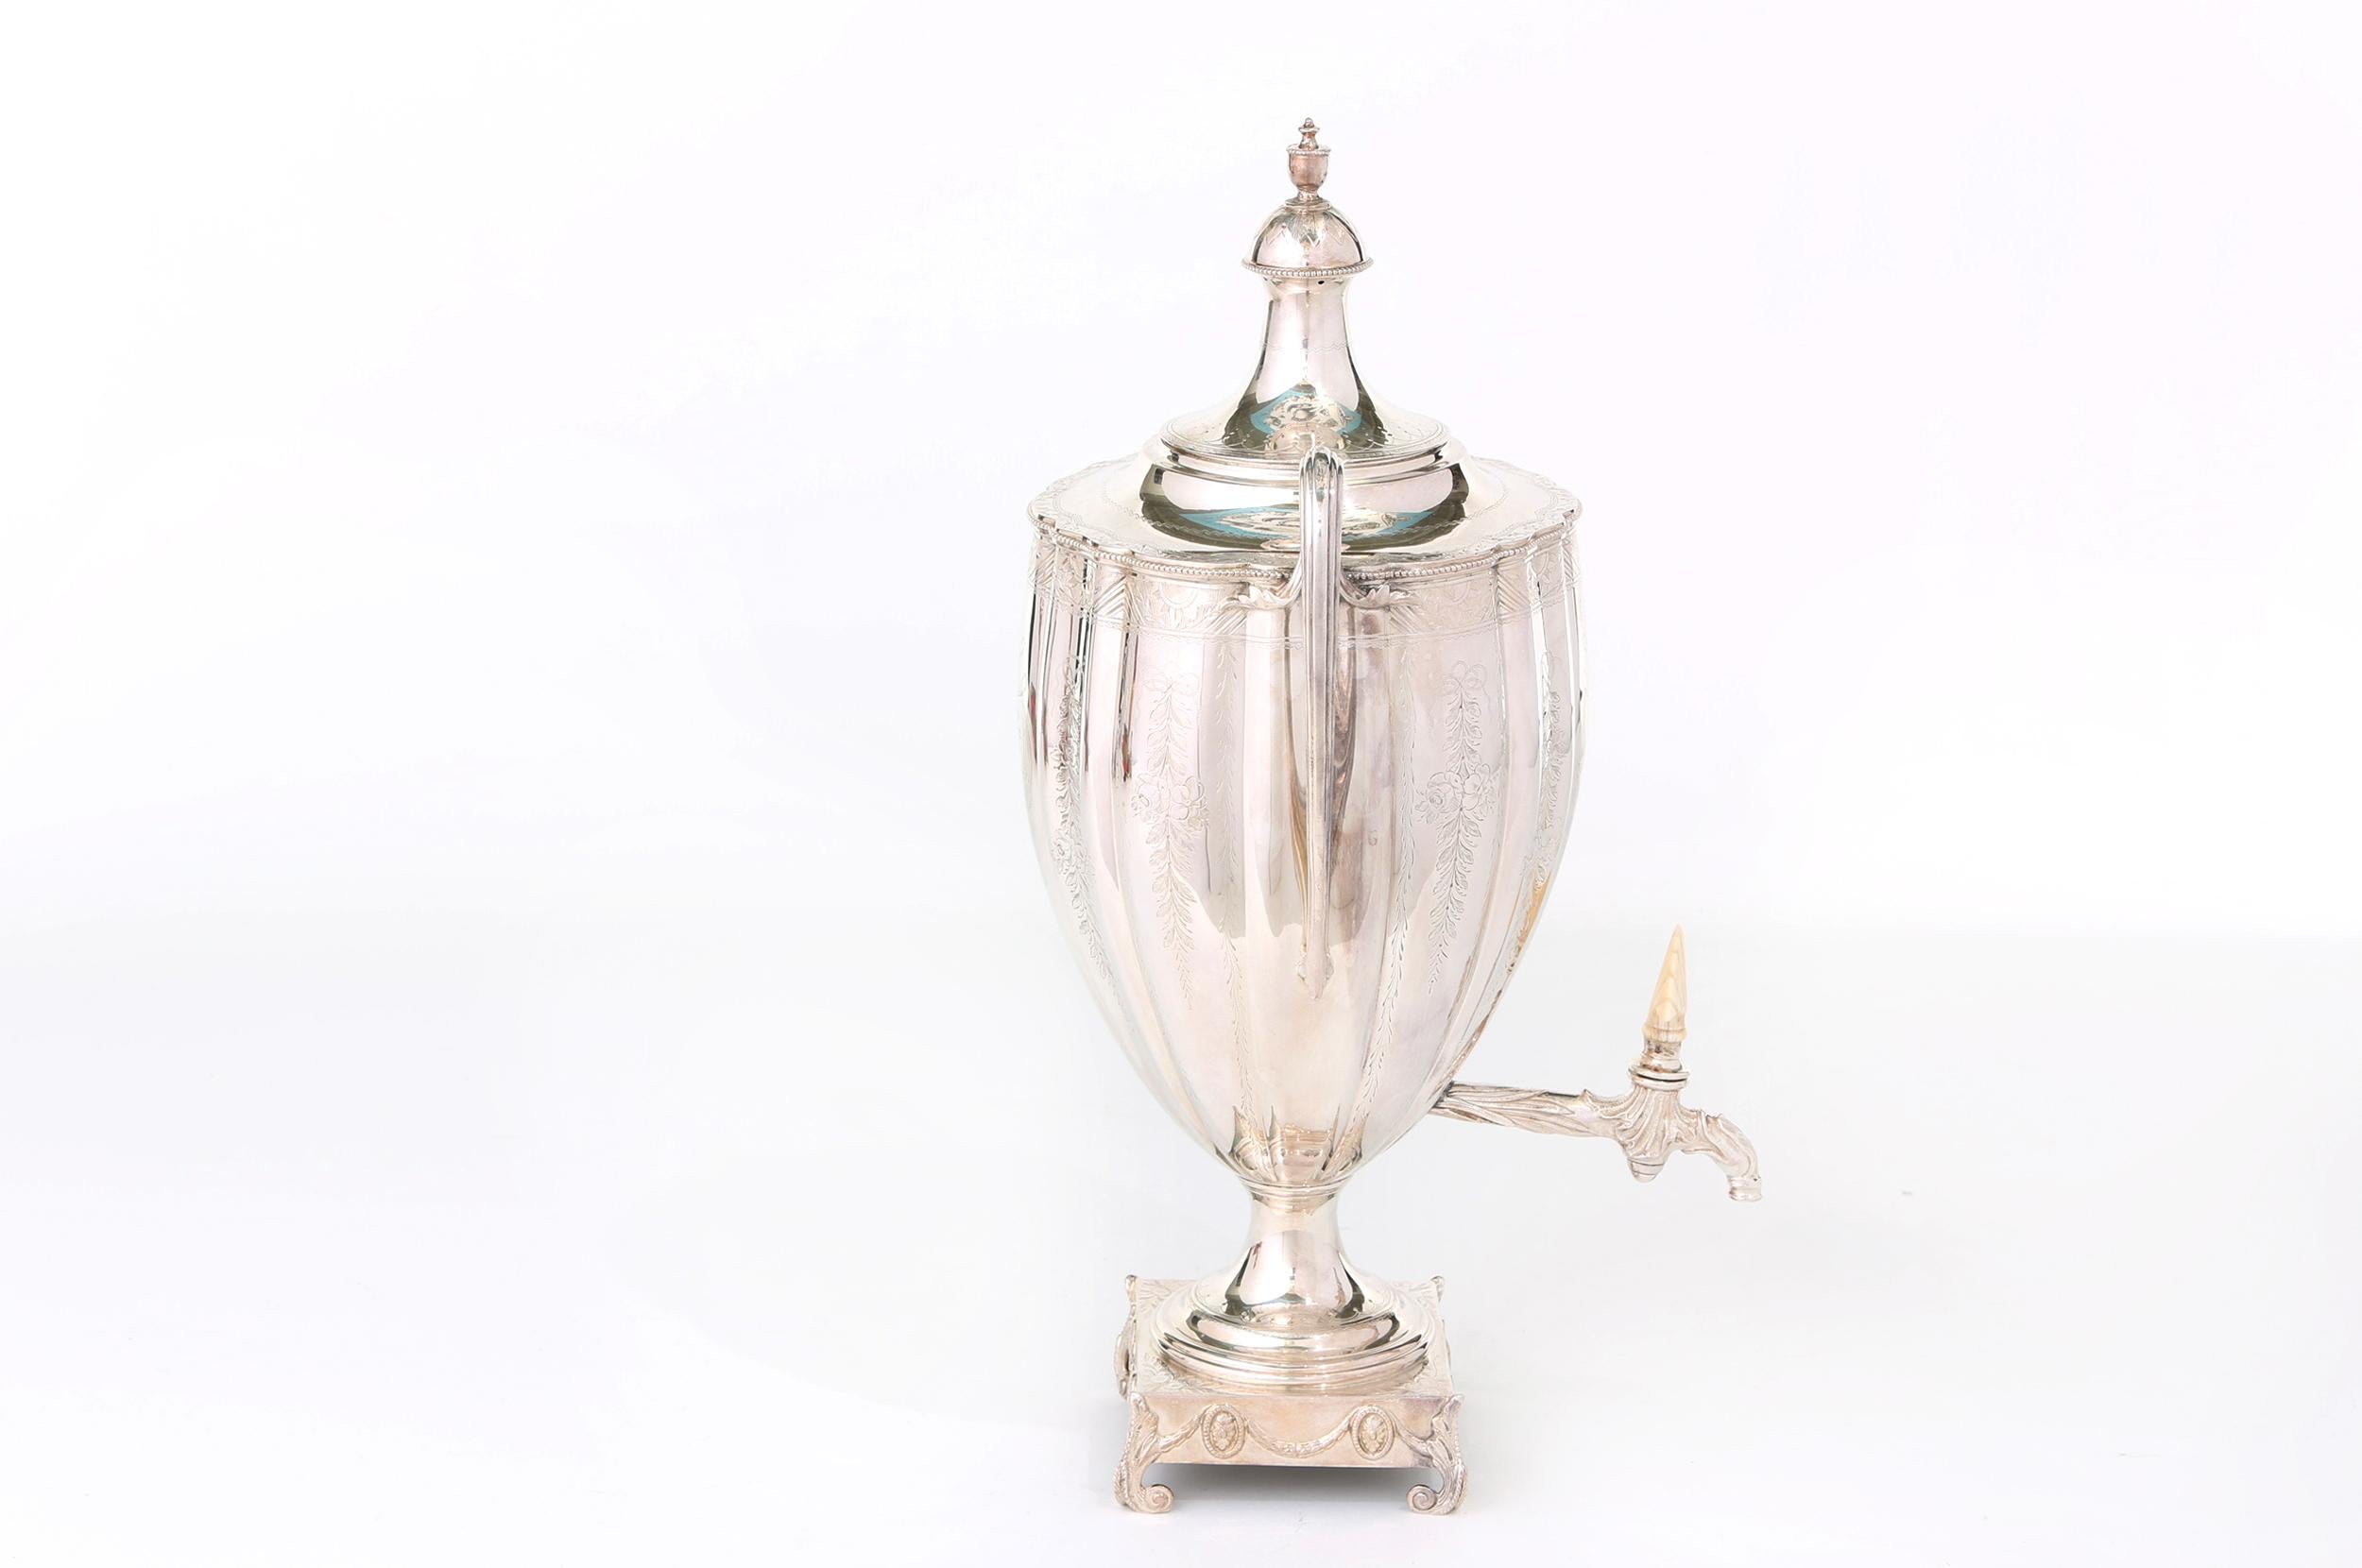 Vase shaped antique English silver plated tea urn / samovar with bright cut hand engraved with typical neo-classical leaf, flower and garland engraving.  The large loop handles have large acanthus leaf termini.  The engraved spout has a hand carved